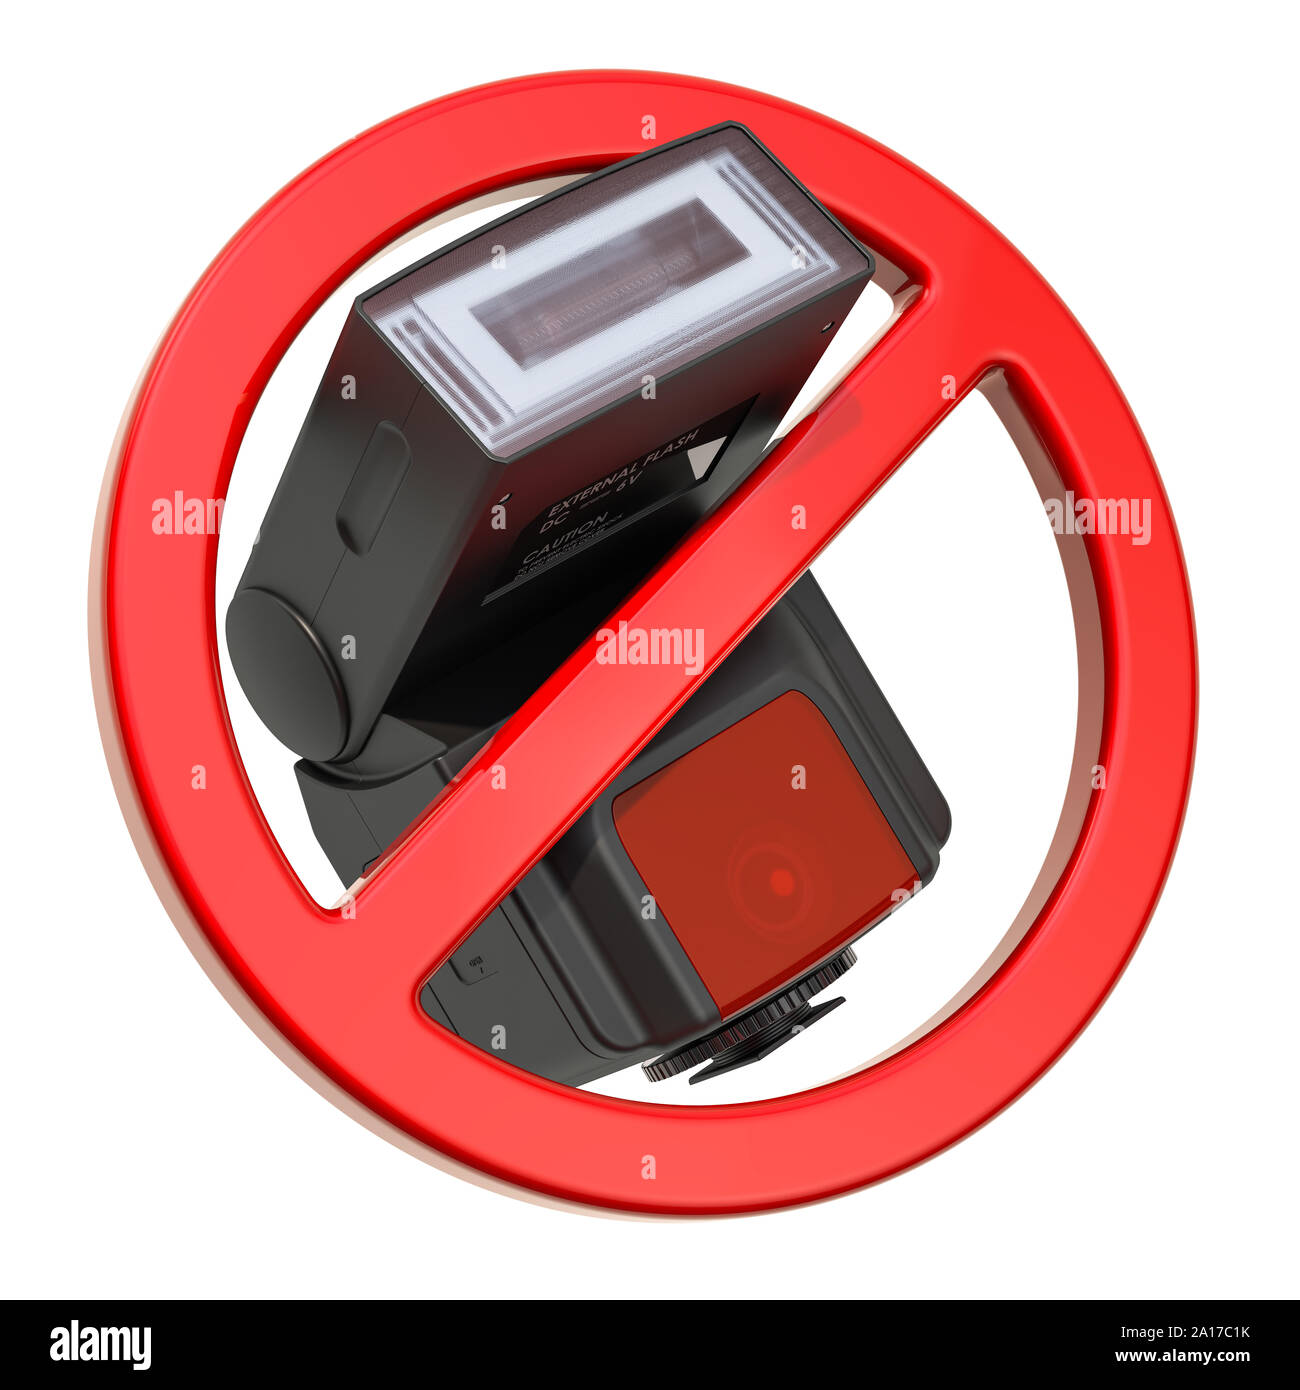 Forbidden sign with flash. Do not use flash photography concept, 3D rendering isolated on white background Stock Photo